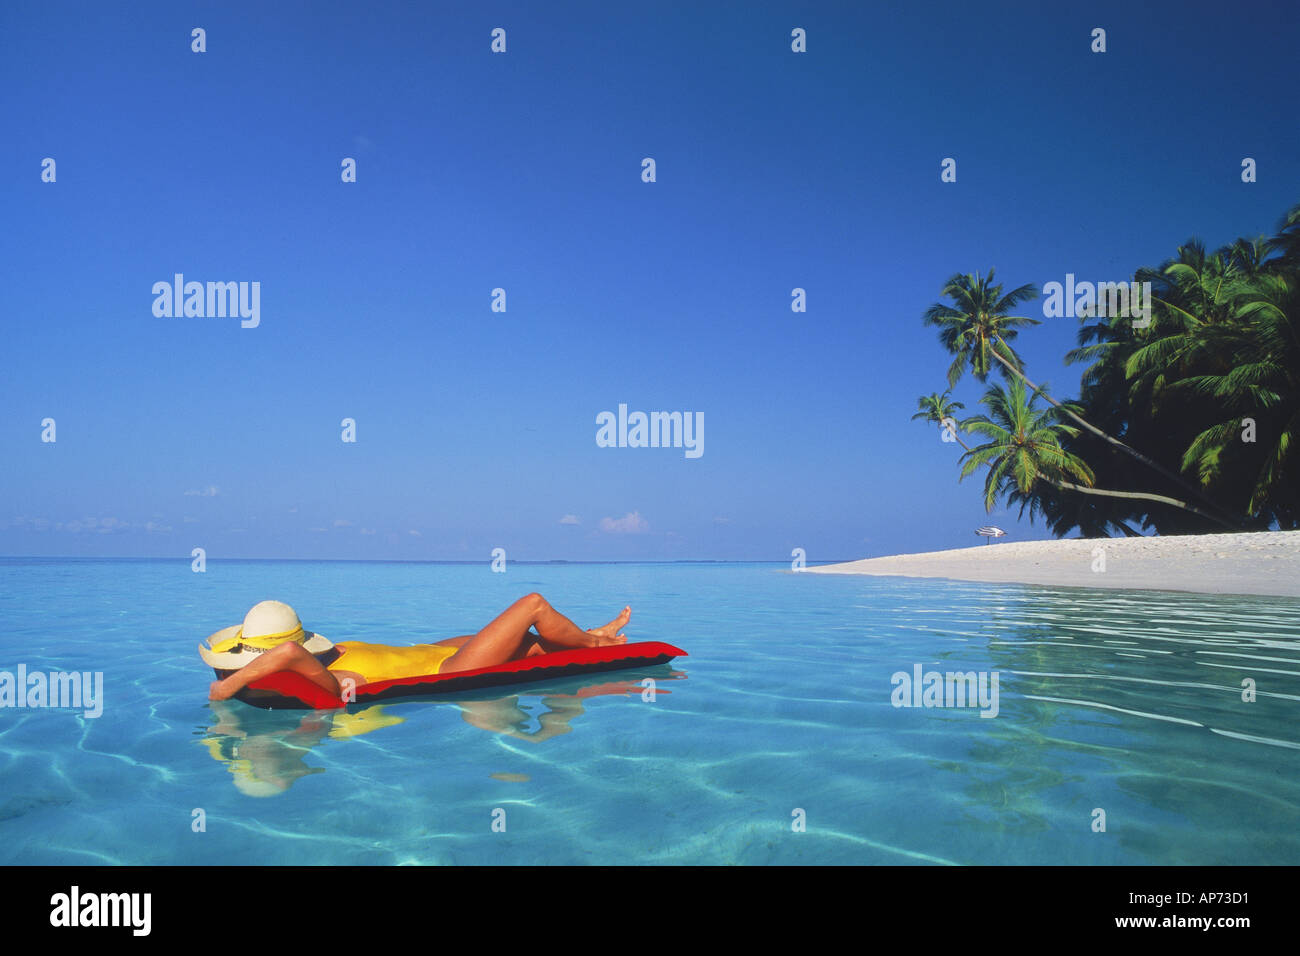 Woman relaxing on air mattress in tropical paradise Stock Photo